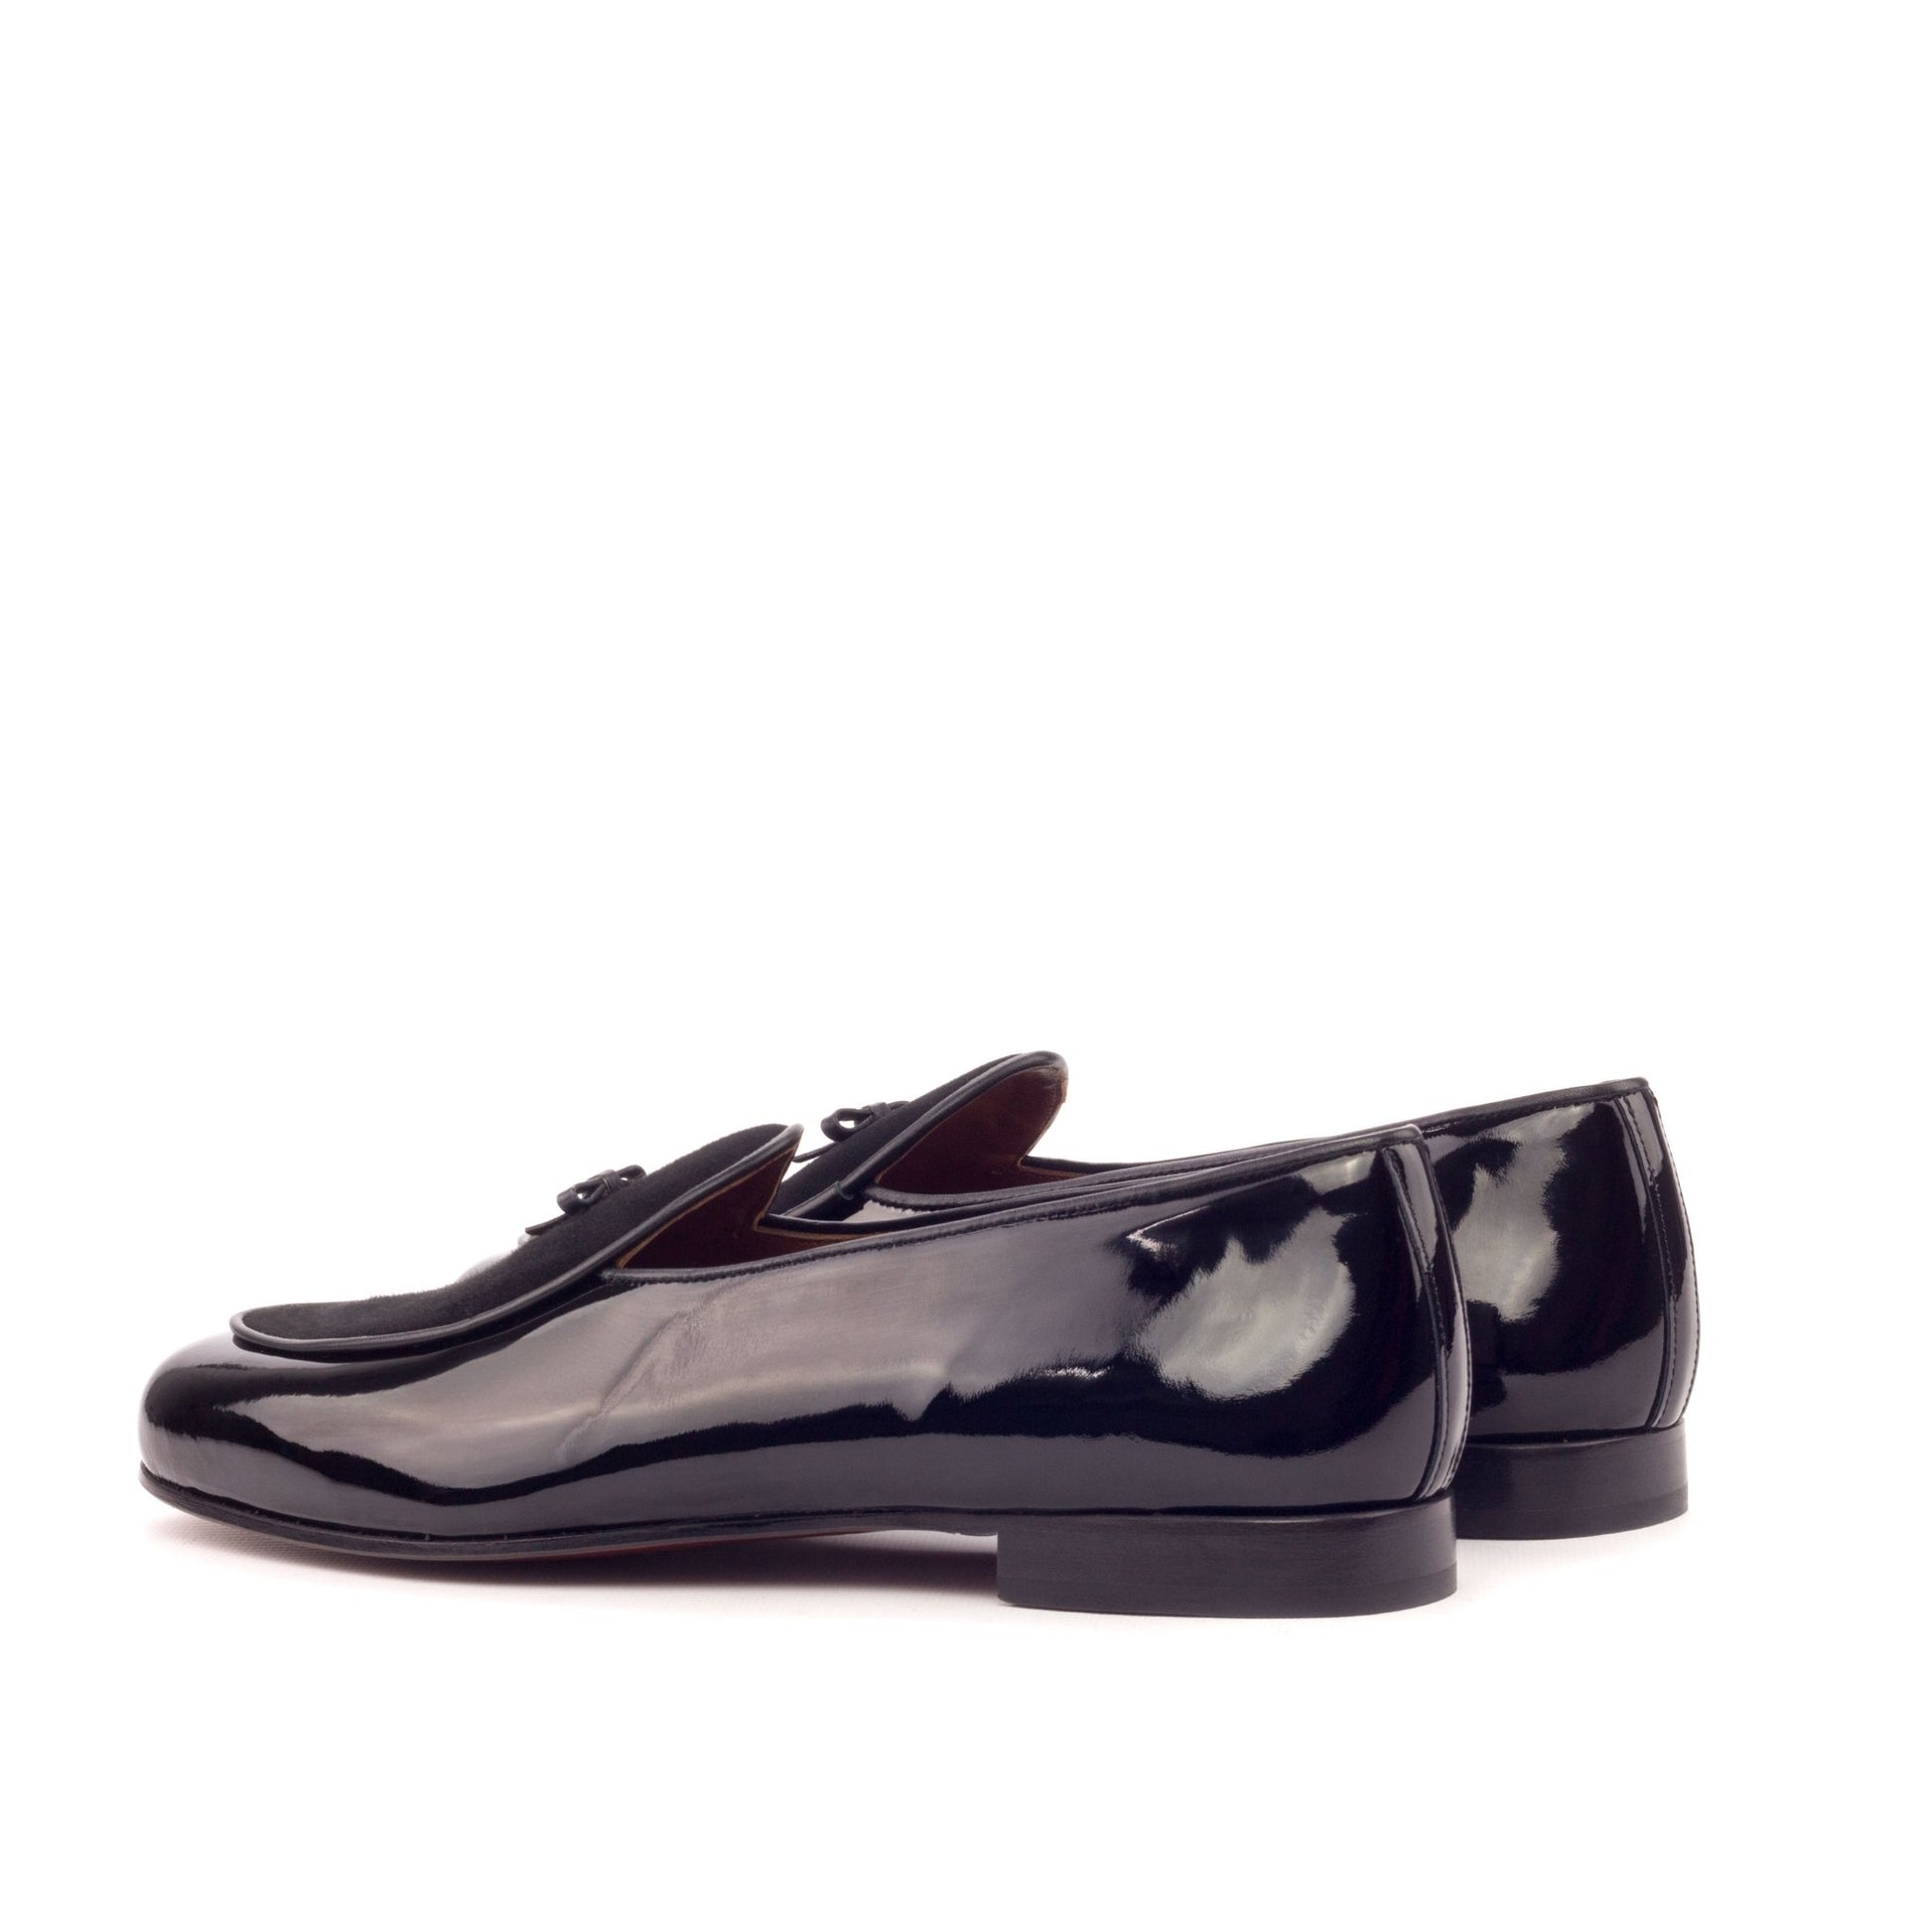 Belgian Slipper in Black Suede and Black Patent - Zatorres | Free Shipping on orders over $200